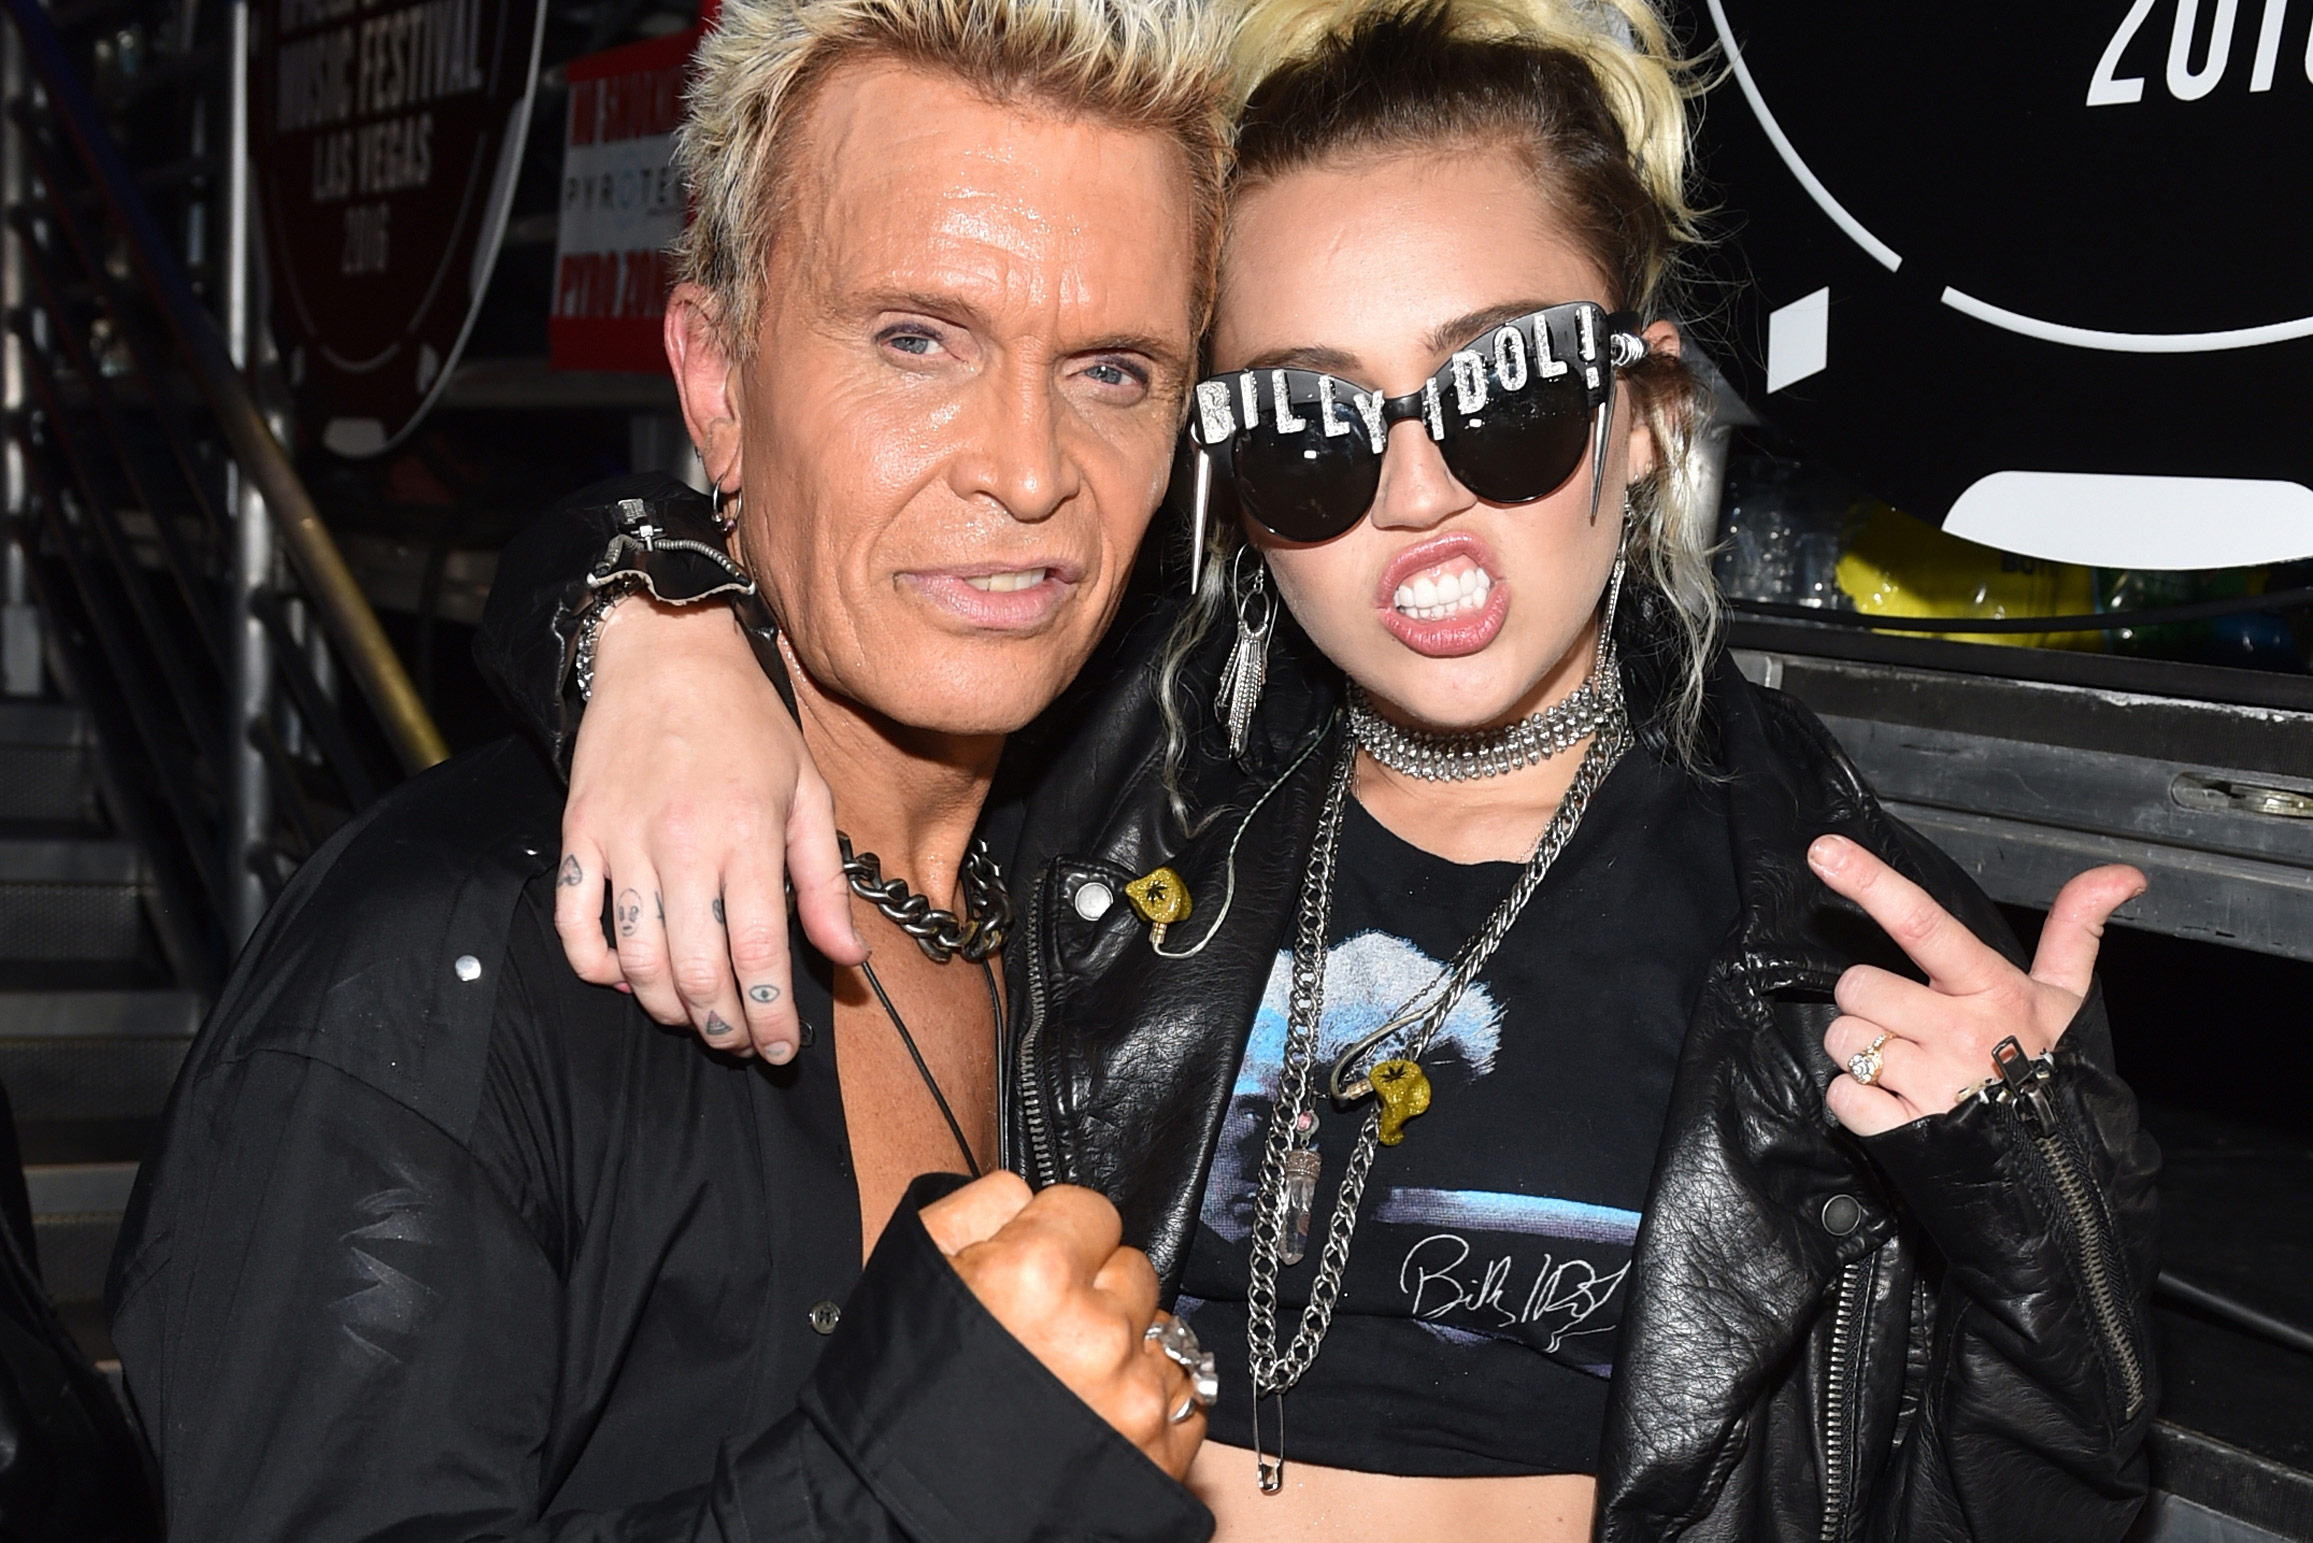 Billy Idol, Collaboration with Miley Cyrus, Star snaps, Page Six exclusive, 2320x1550 HD Desktop